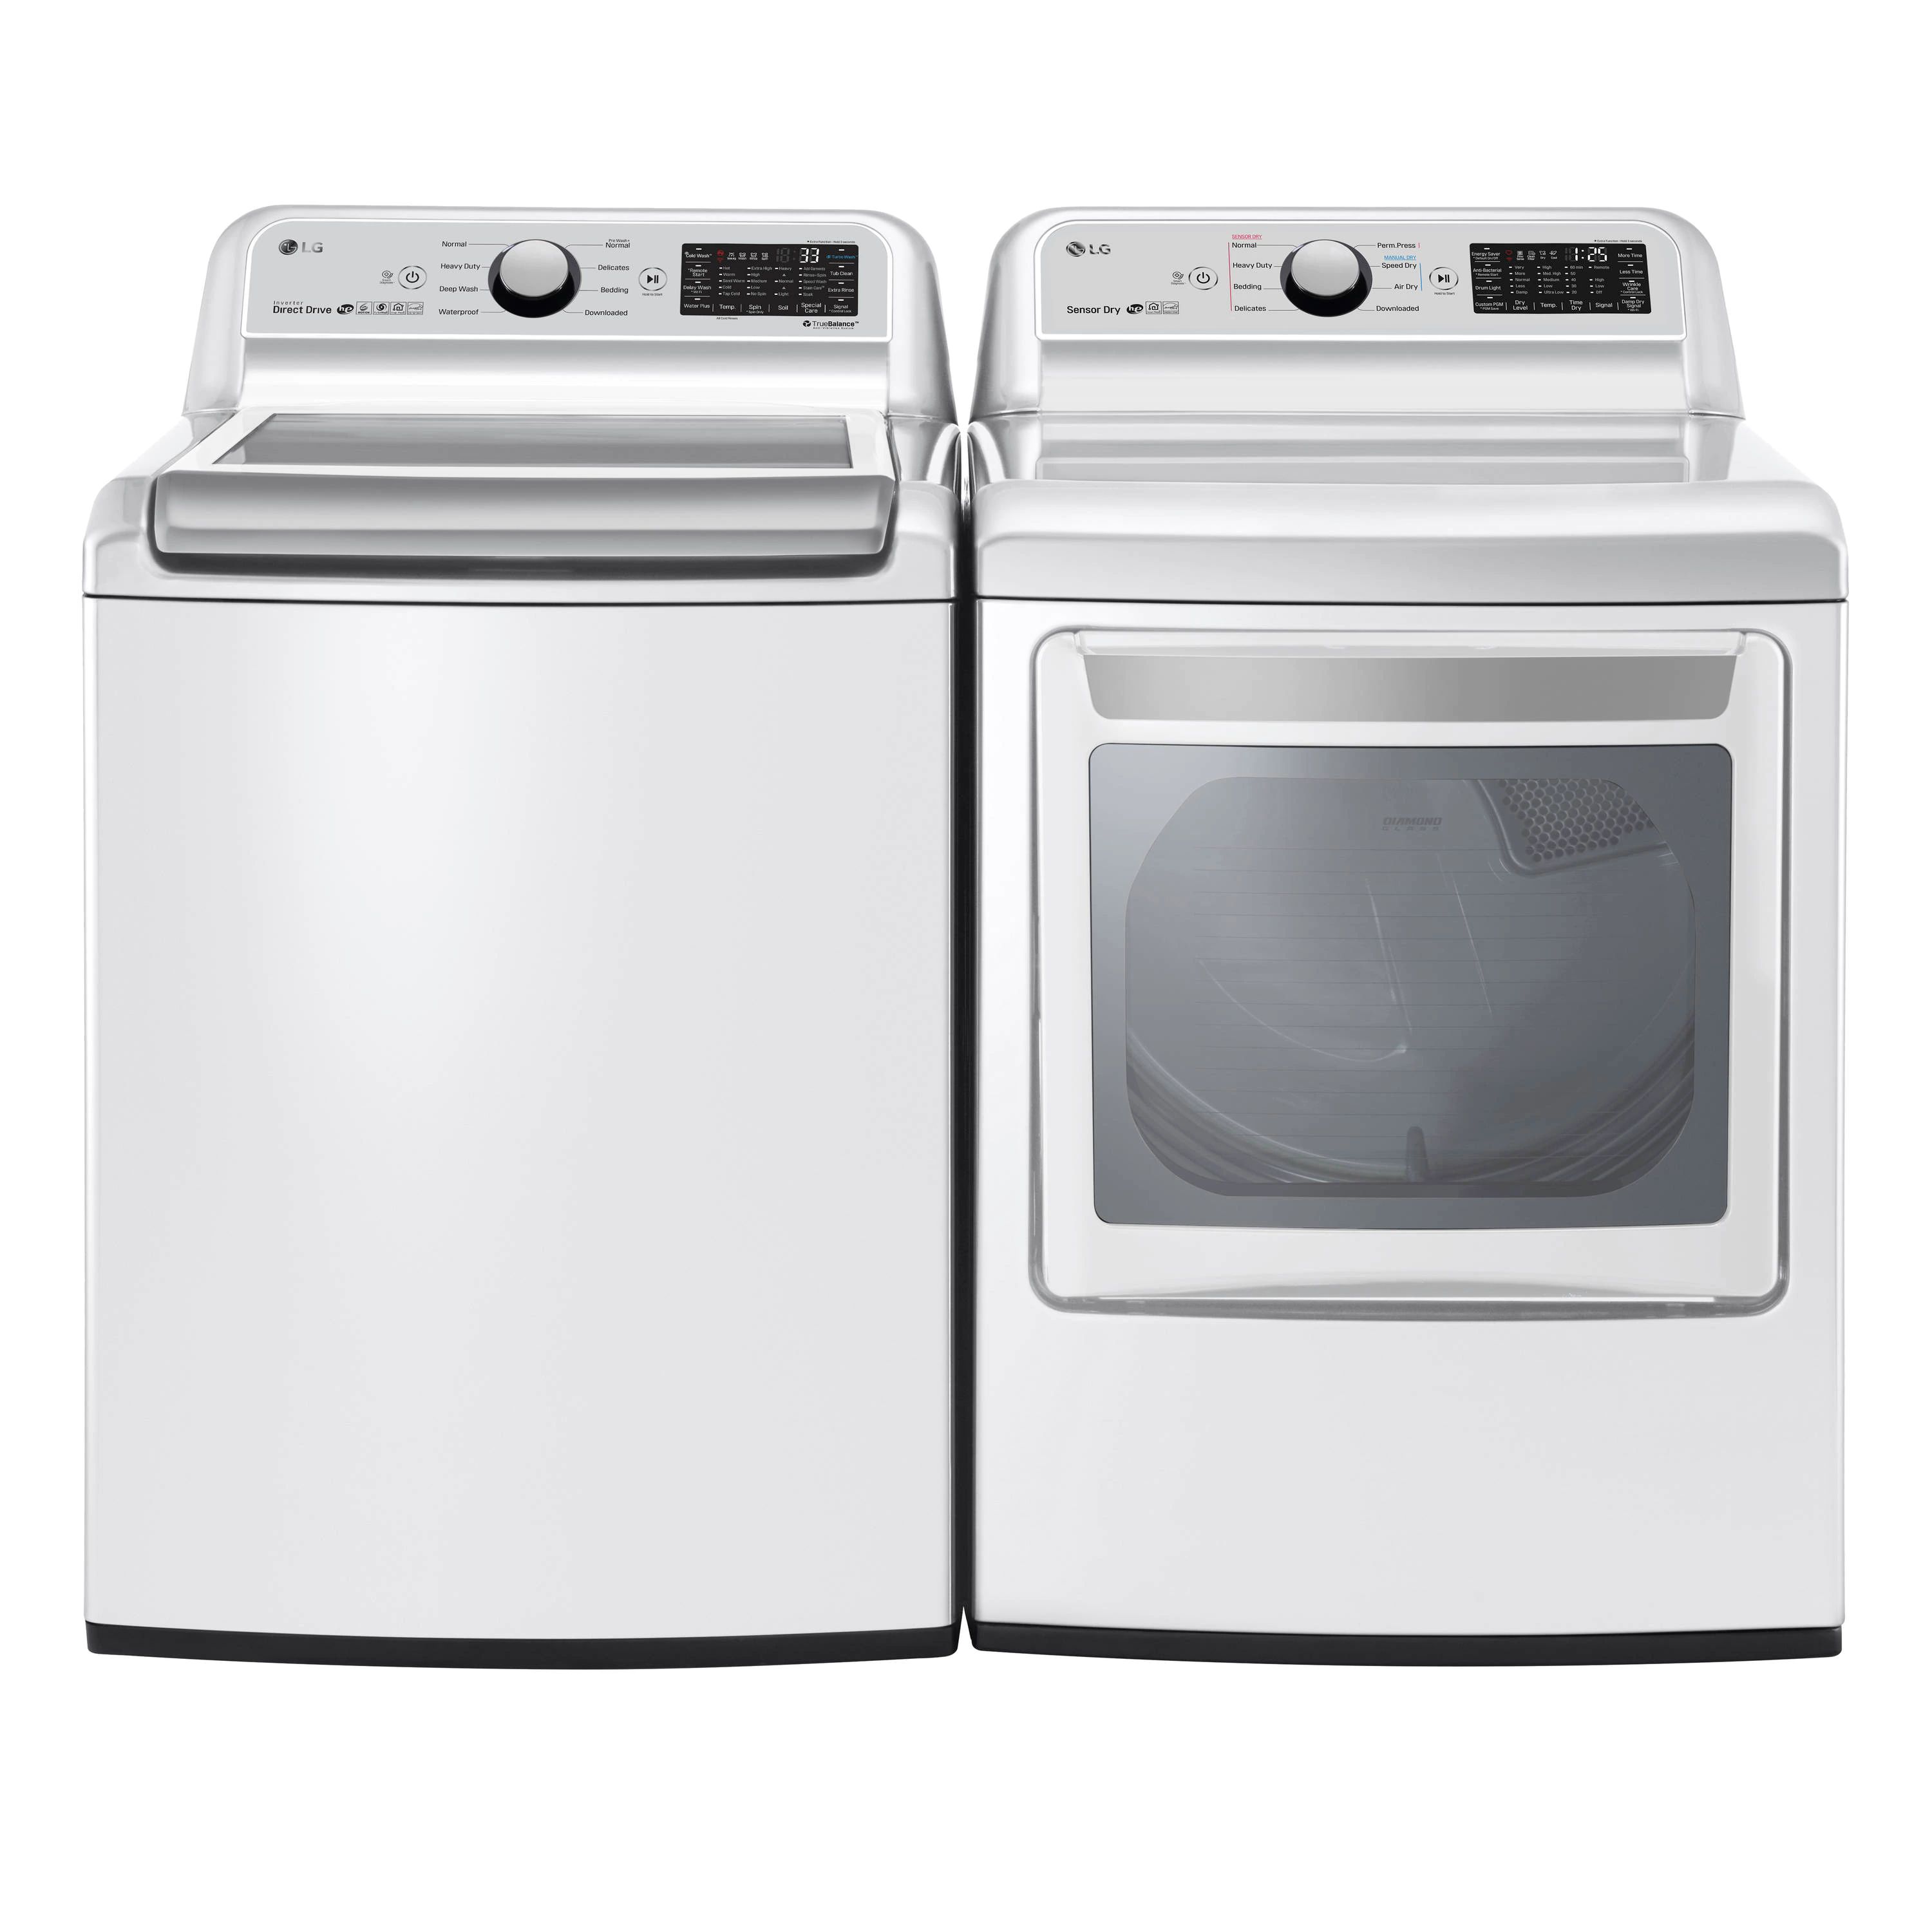 LG TurboWash 3D White Top-Load Washer & Electric Dryer Set at Lowes.com | Lowe's